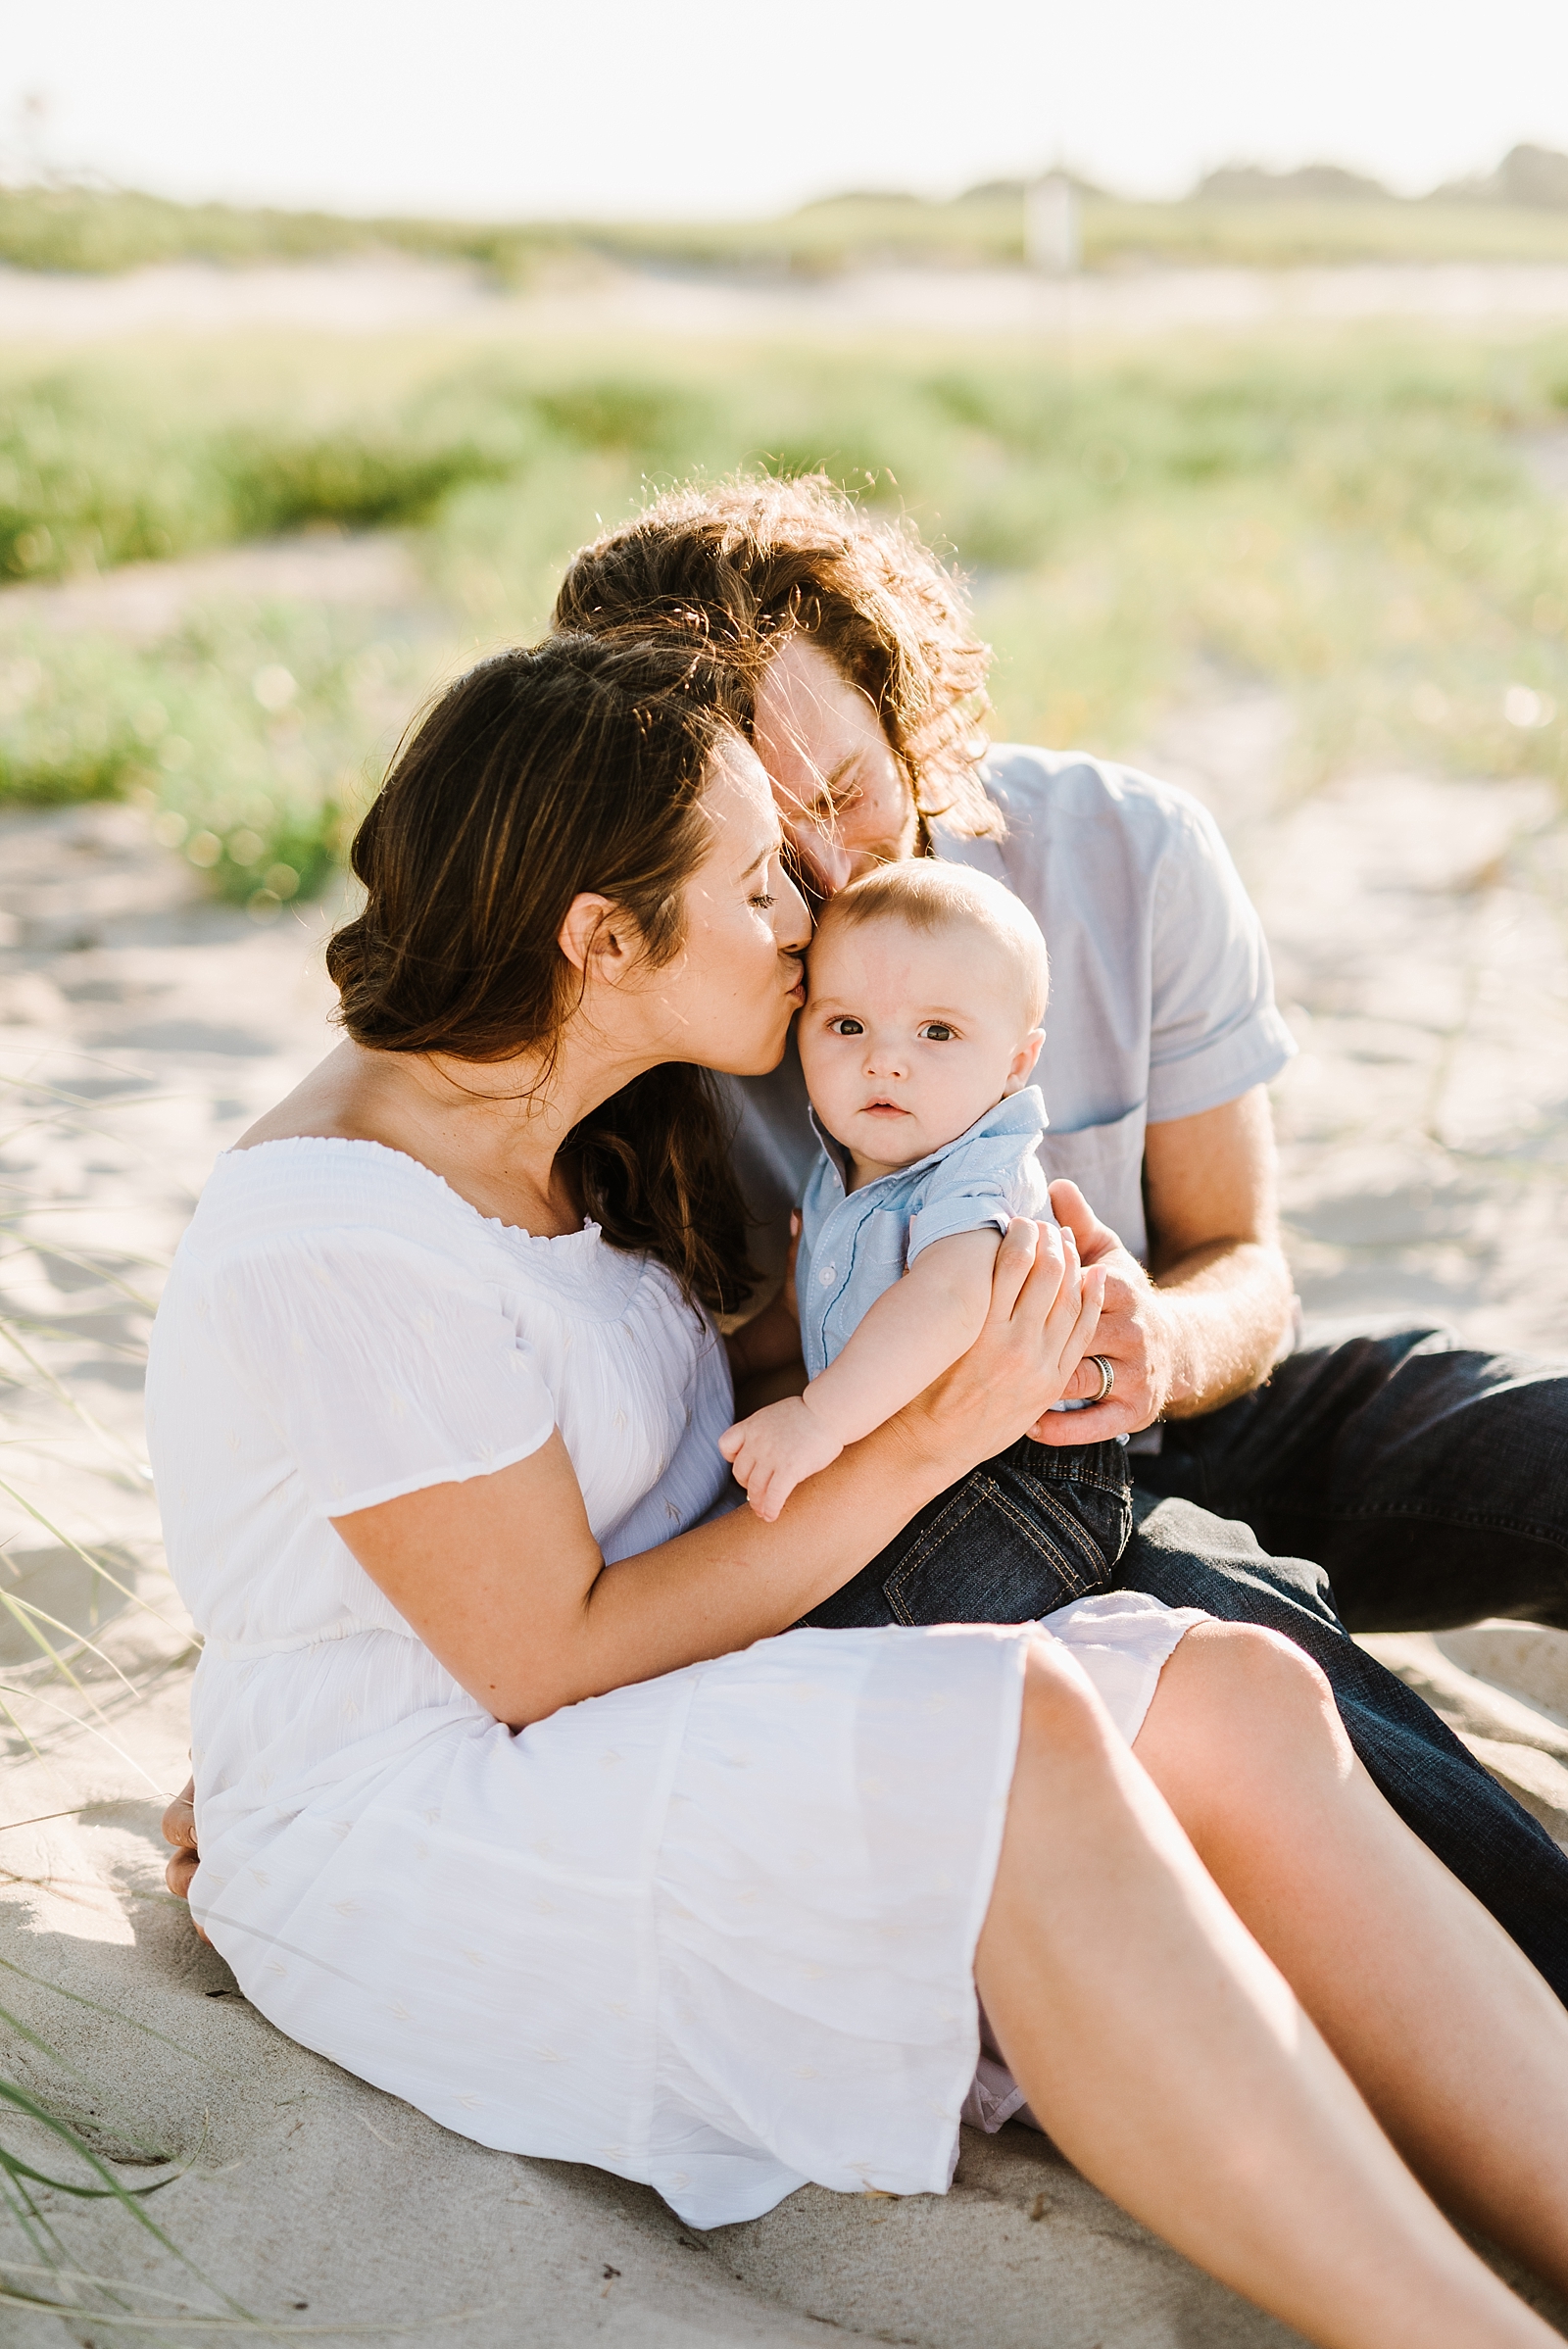 Sweet Sunset Family Session at Crane Beach in Ipswich, MA by Boston Wedding & Portrait Photographer Annmarie Swift